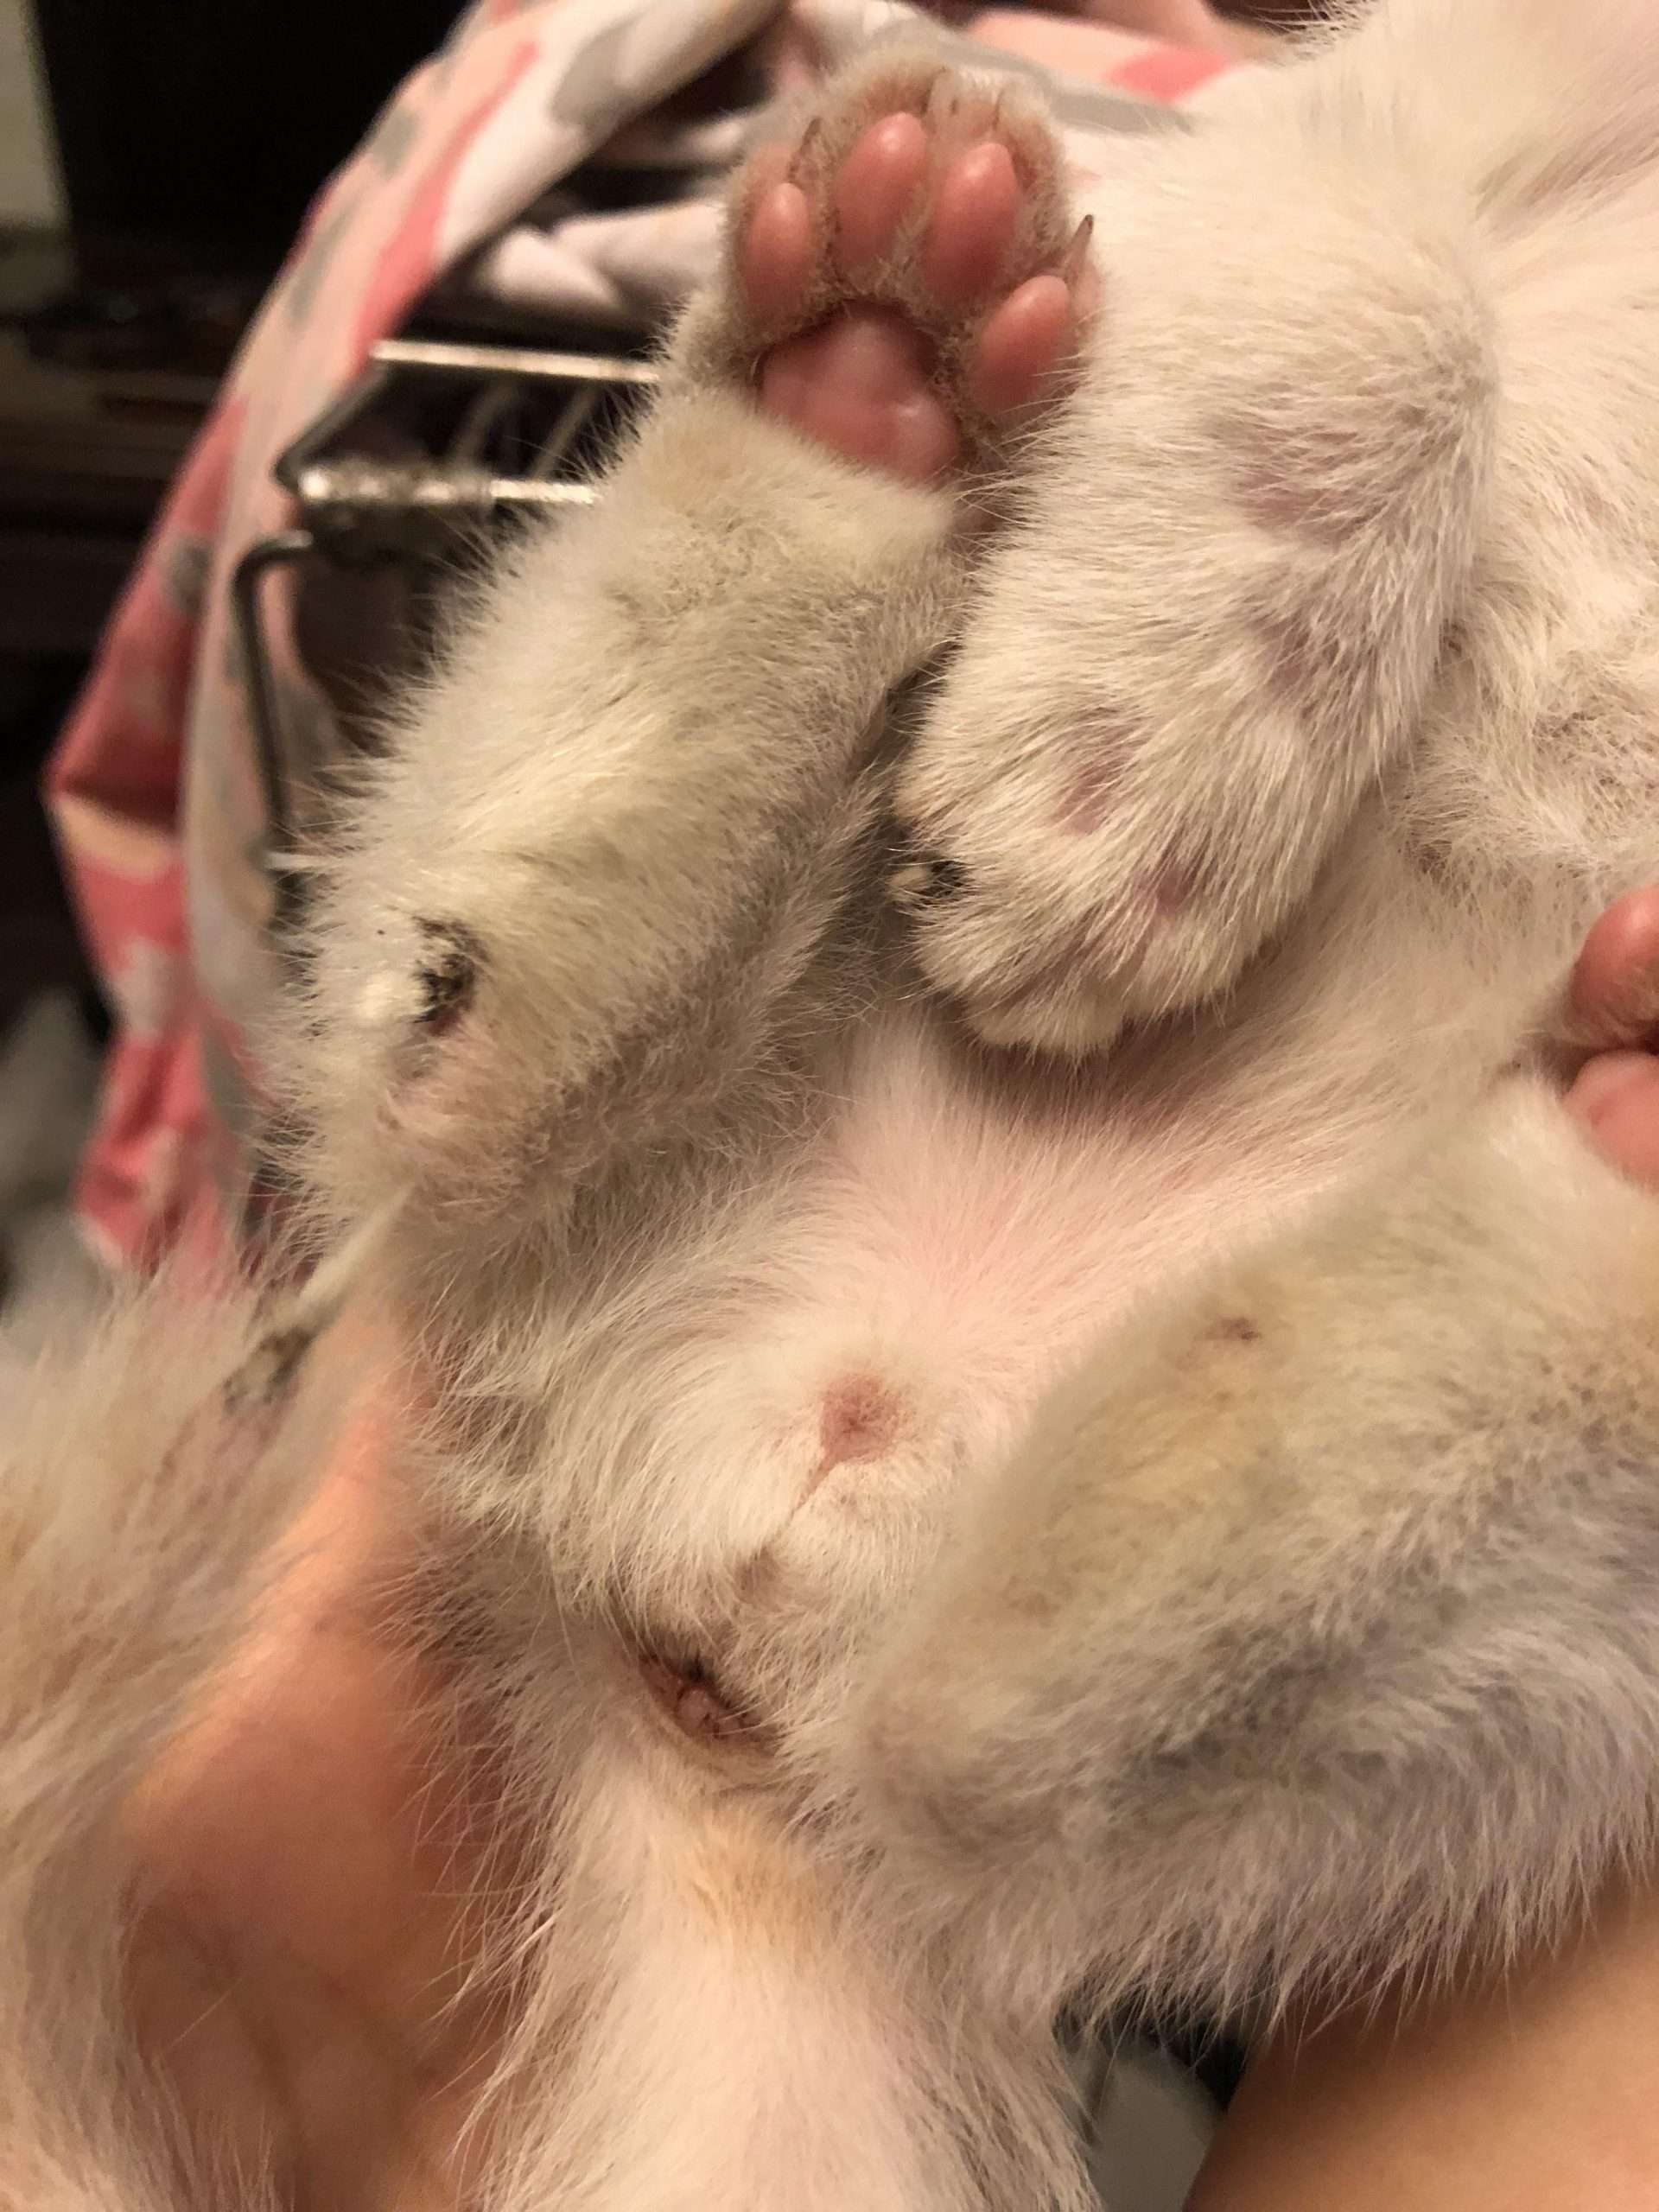 Can someone please help identify the gender of this kitten ...